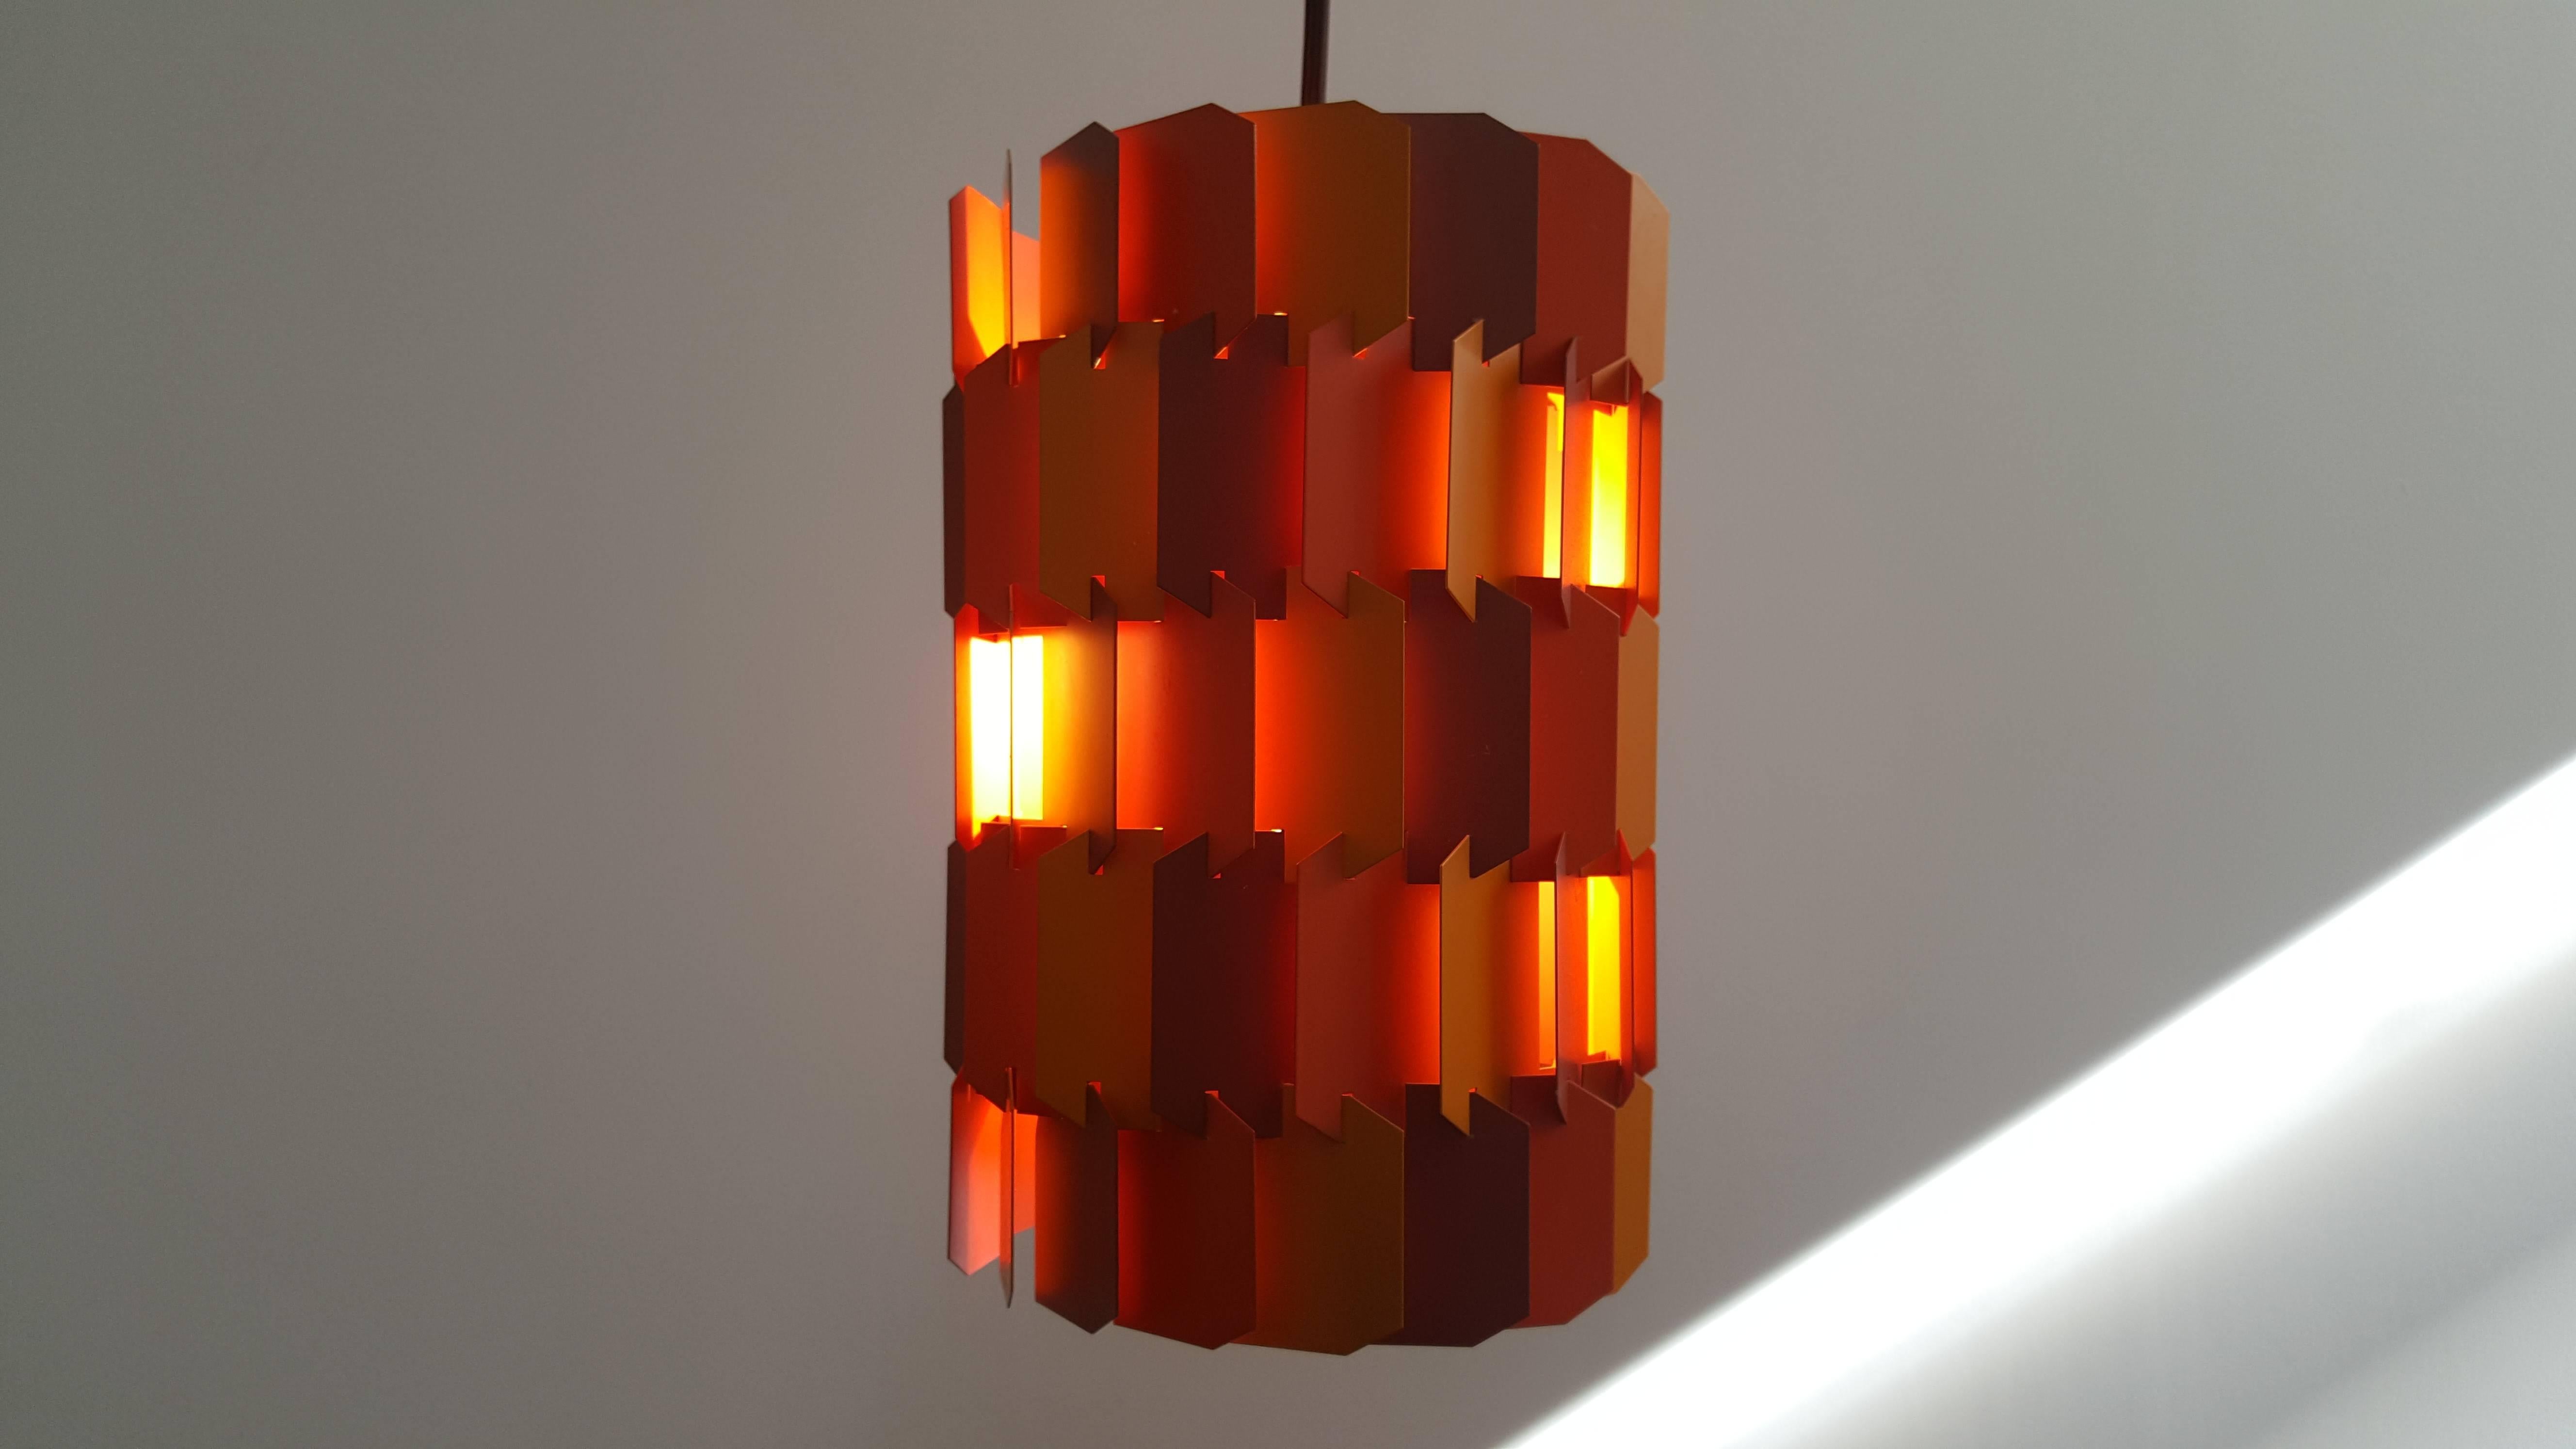 Louis Weisdorf 'Facet' pendant, designed 1970, produced by Lyfa.

The Facet-Pop is constructed from 18 castellated metal strips, identical in shape but in three different tones of color, woven together to form a cylinder. Light emerges through